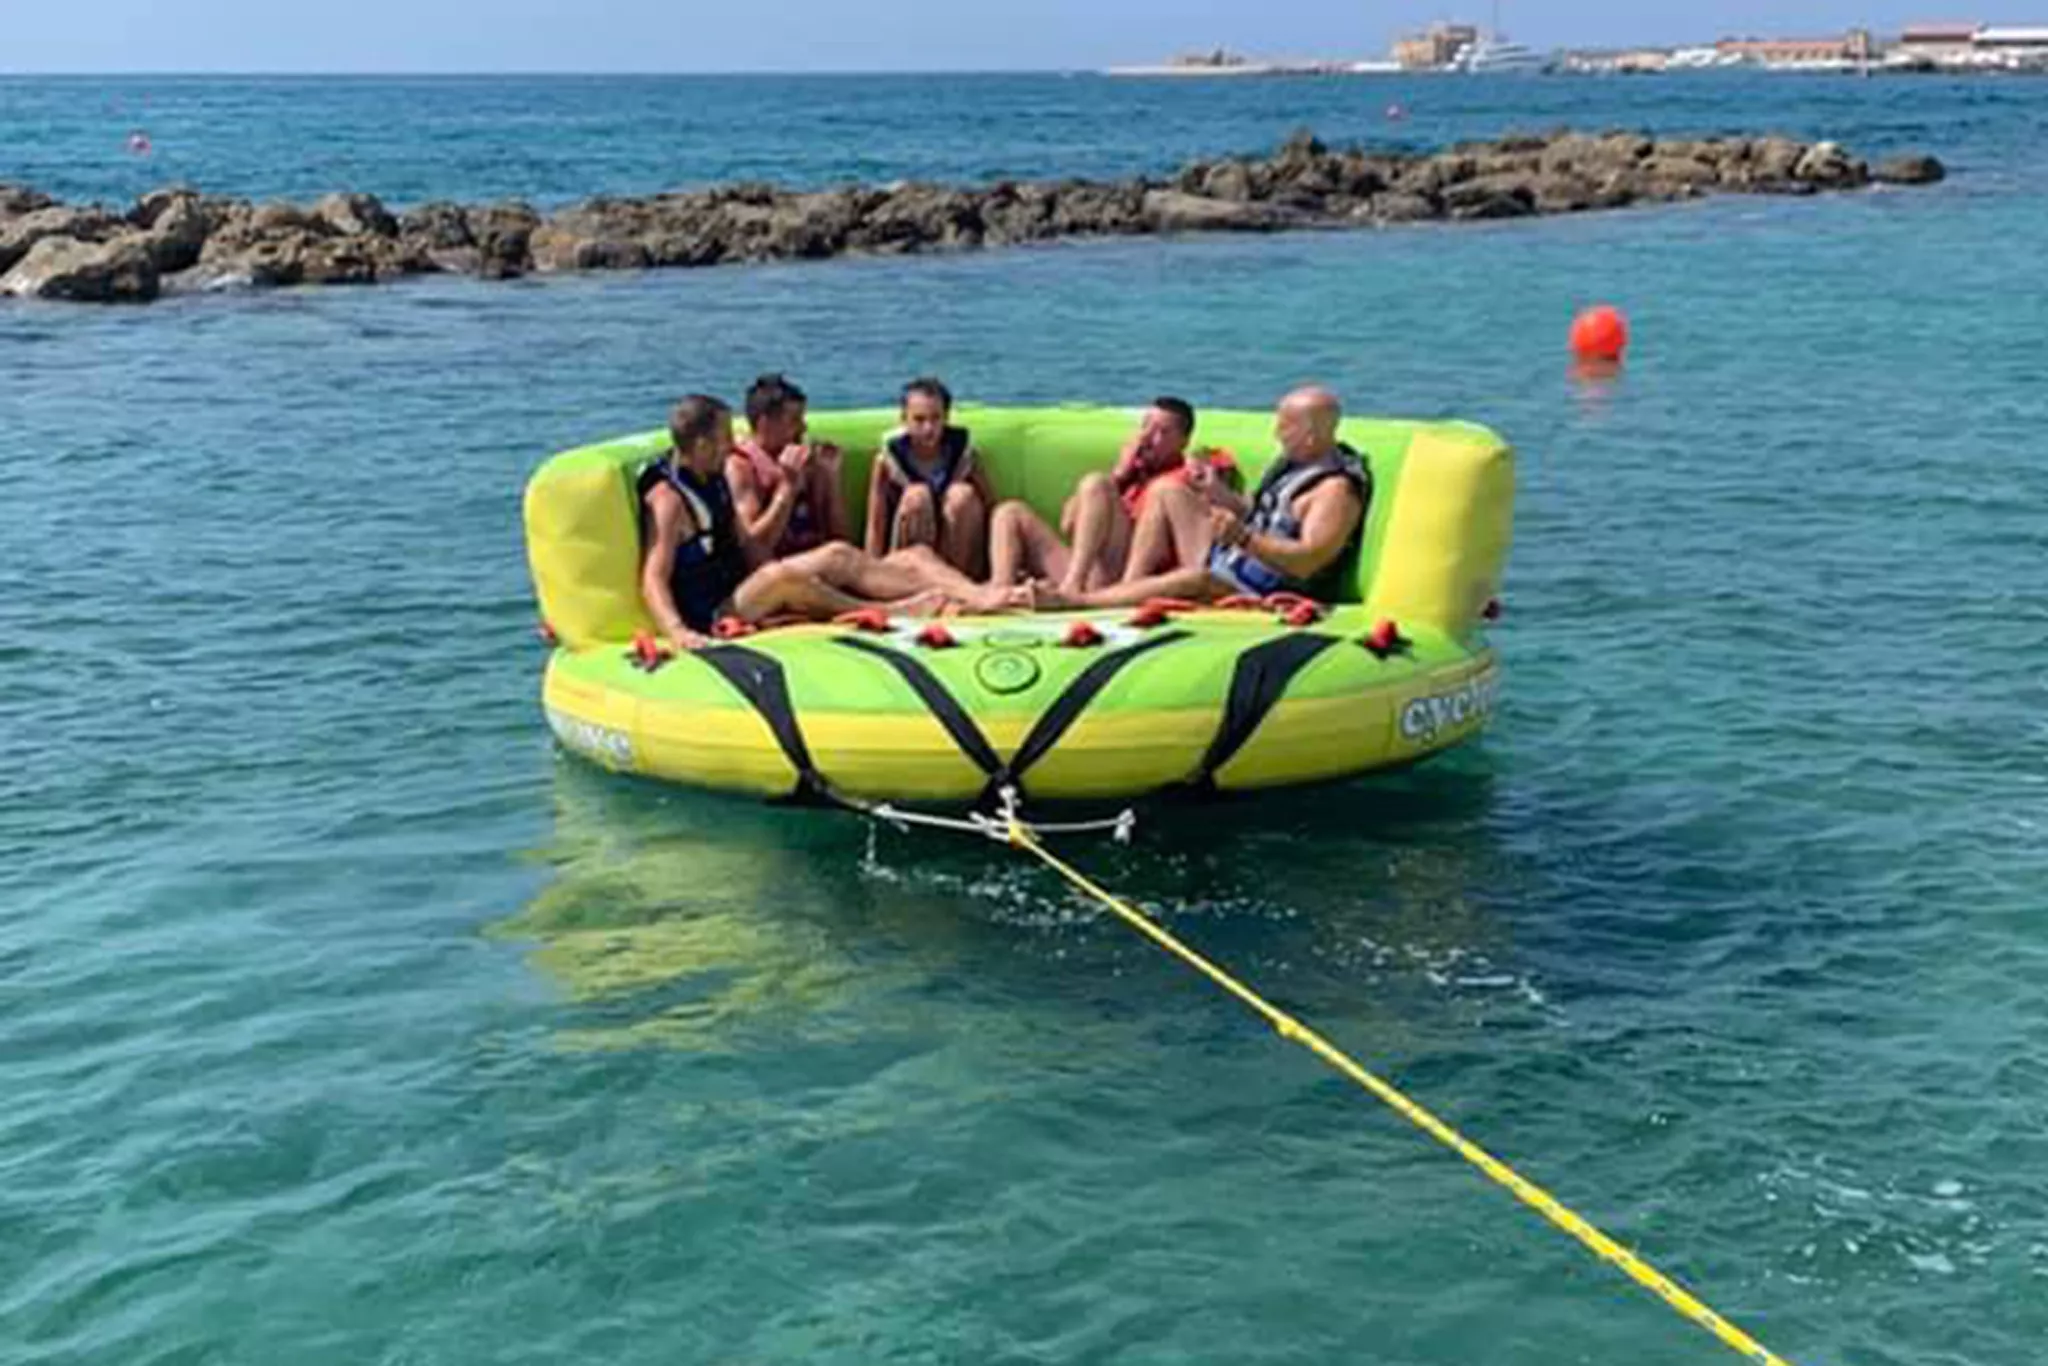 Pafos Water Sports and Boat Trips in Cyprus, Europe | Parasailing,Speedboats - Rated 1.1